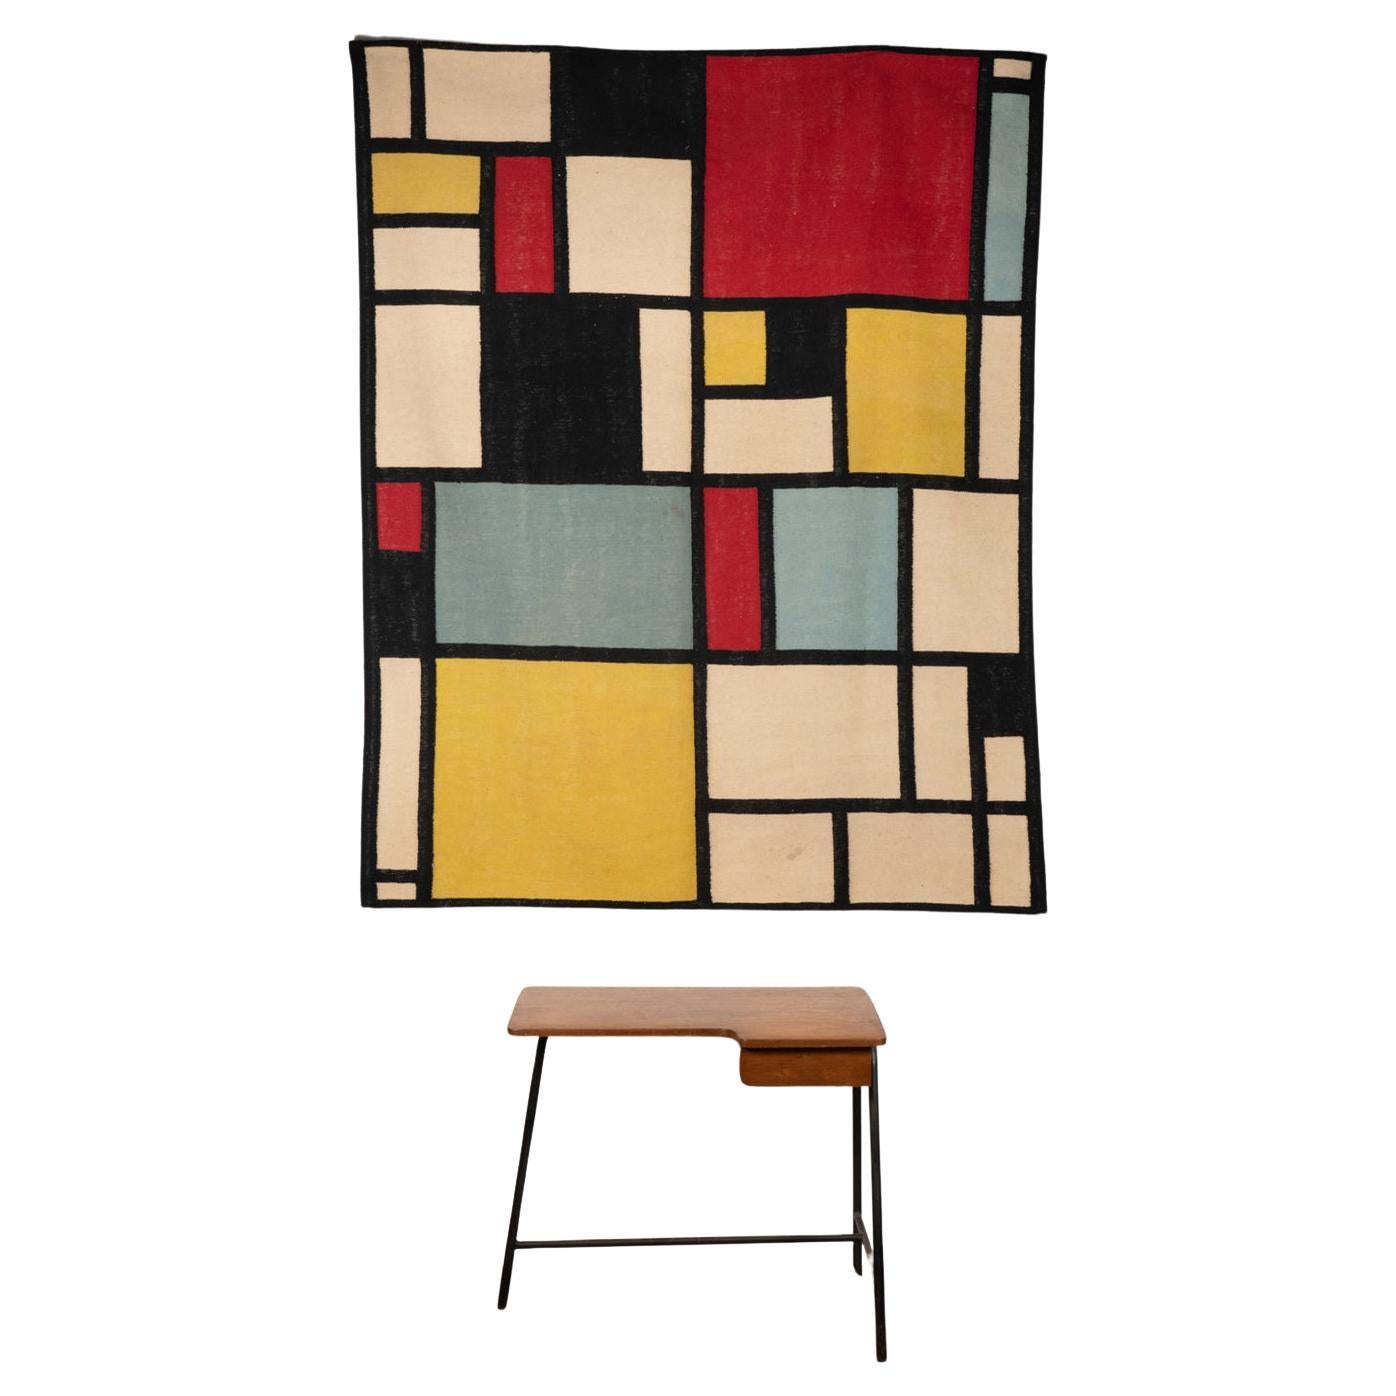 Rug, or tapestry, inspired by Piet Mondrian. Contemporary work